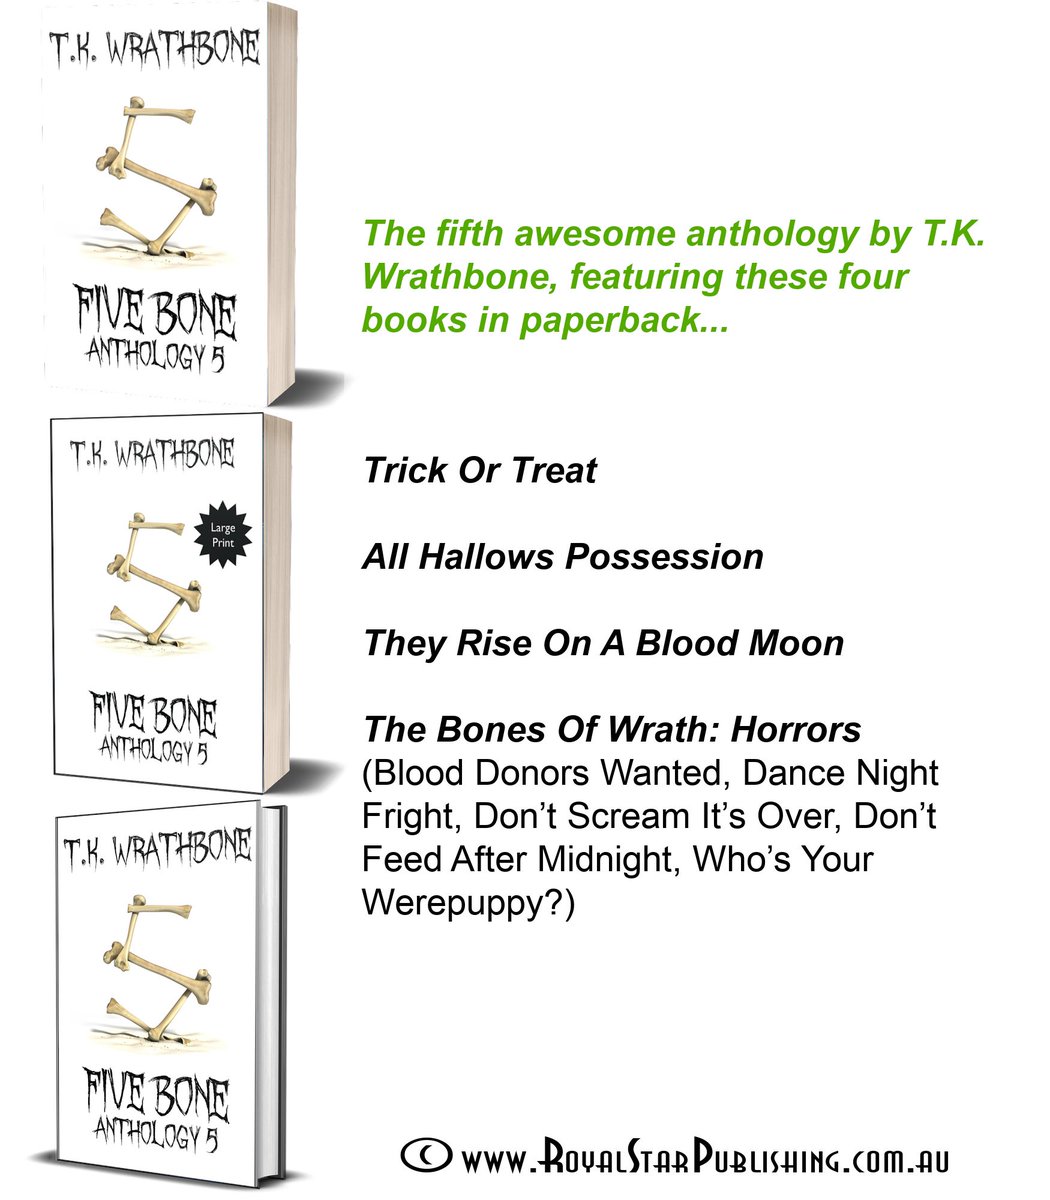 Five Bone:Anthology 5 by T.K. Wrathbone contains four ebooks in one print book. Available in bookstores.
.
#tkwrathbone #author #fivebone #horrorstories #paranormalstories #supernaturalstories #trickortreat #allhallowspossession #theyriseonabloodmoon #thebonesofwrathhorrors